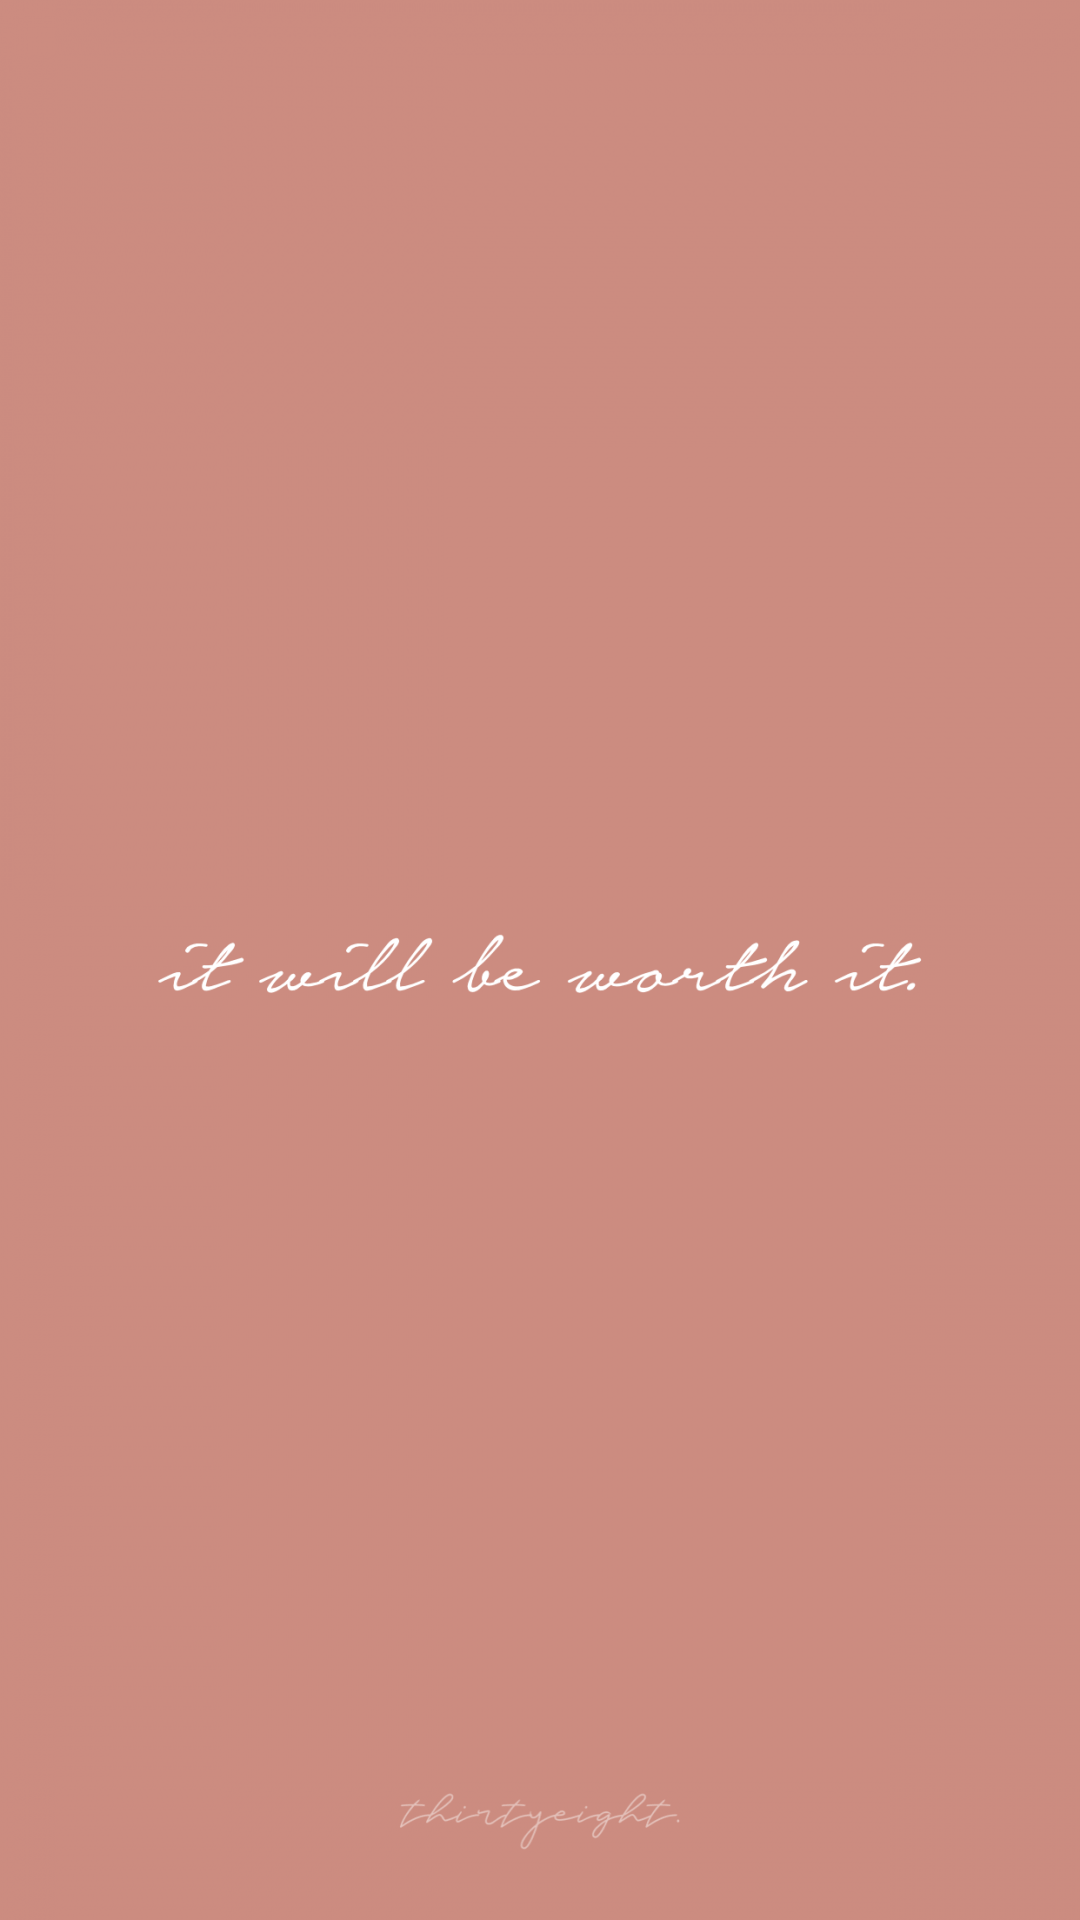 It will be worth - Inspirational